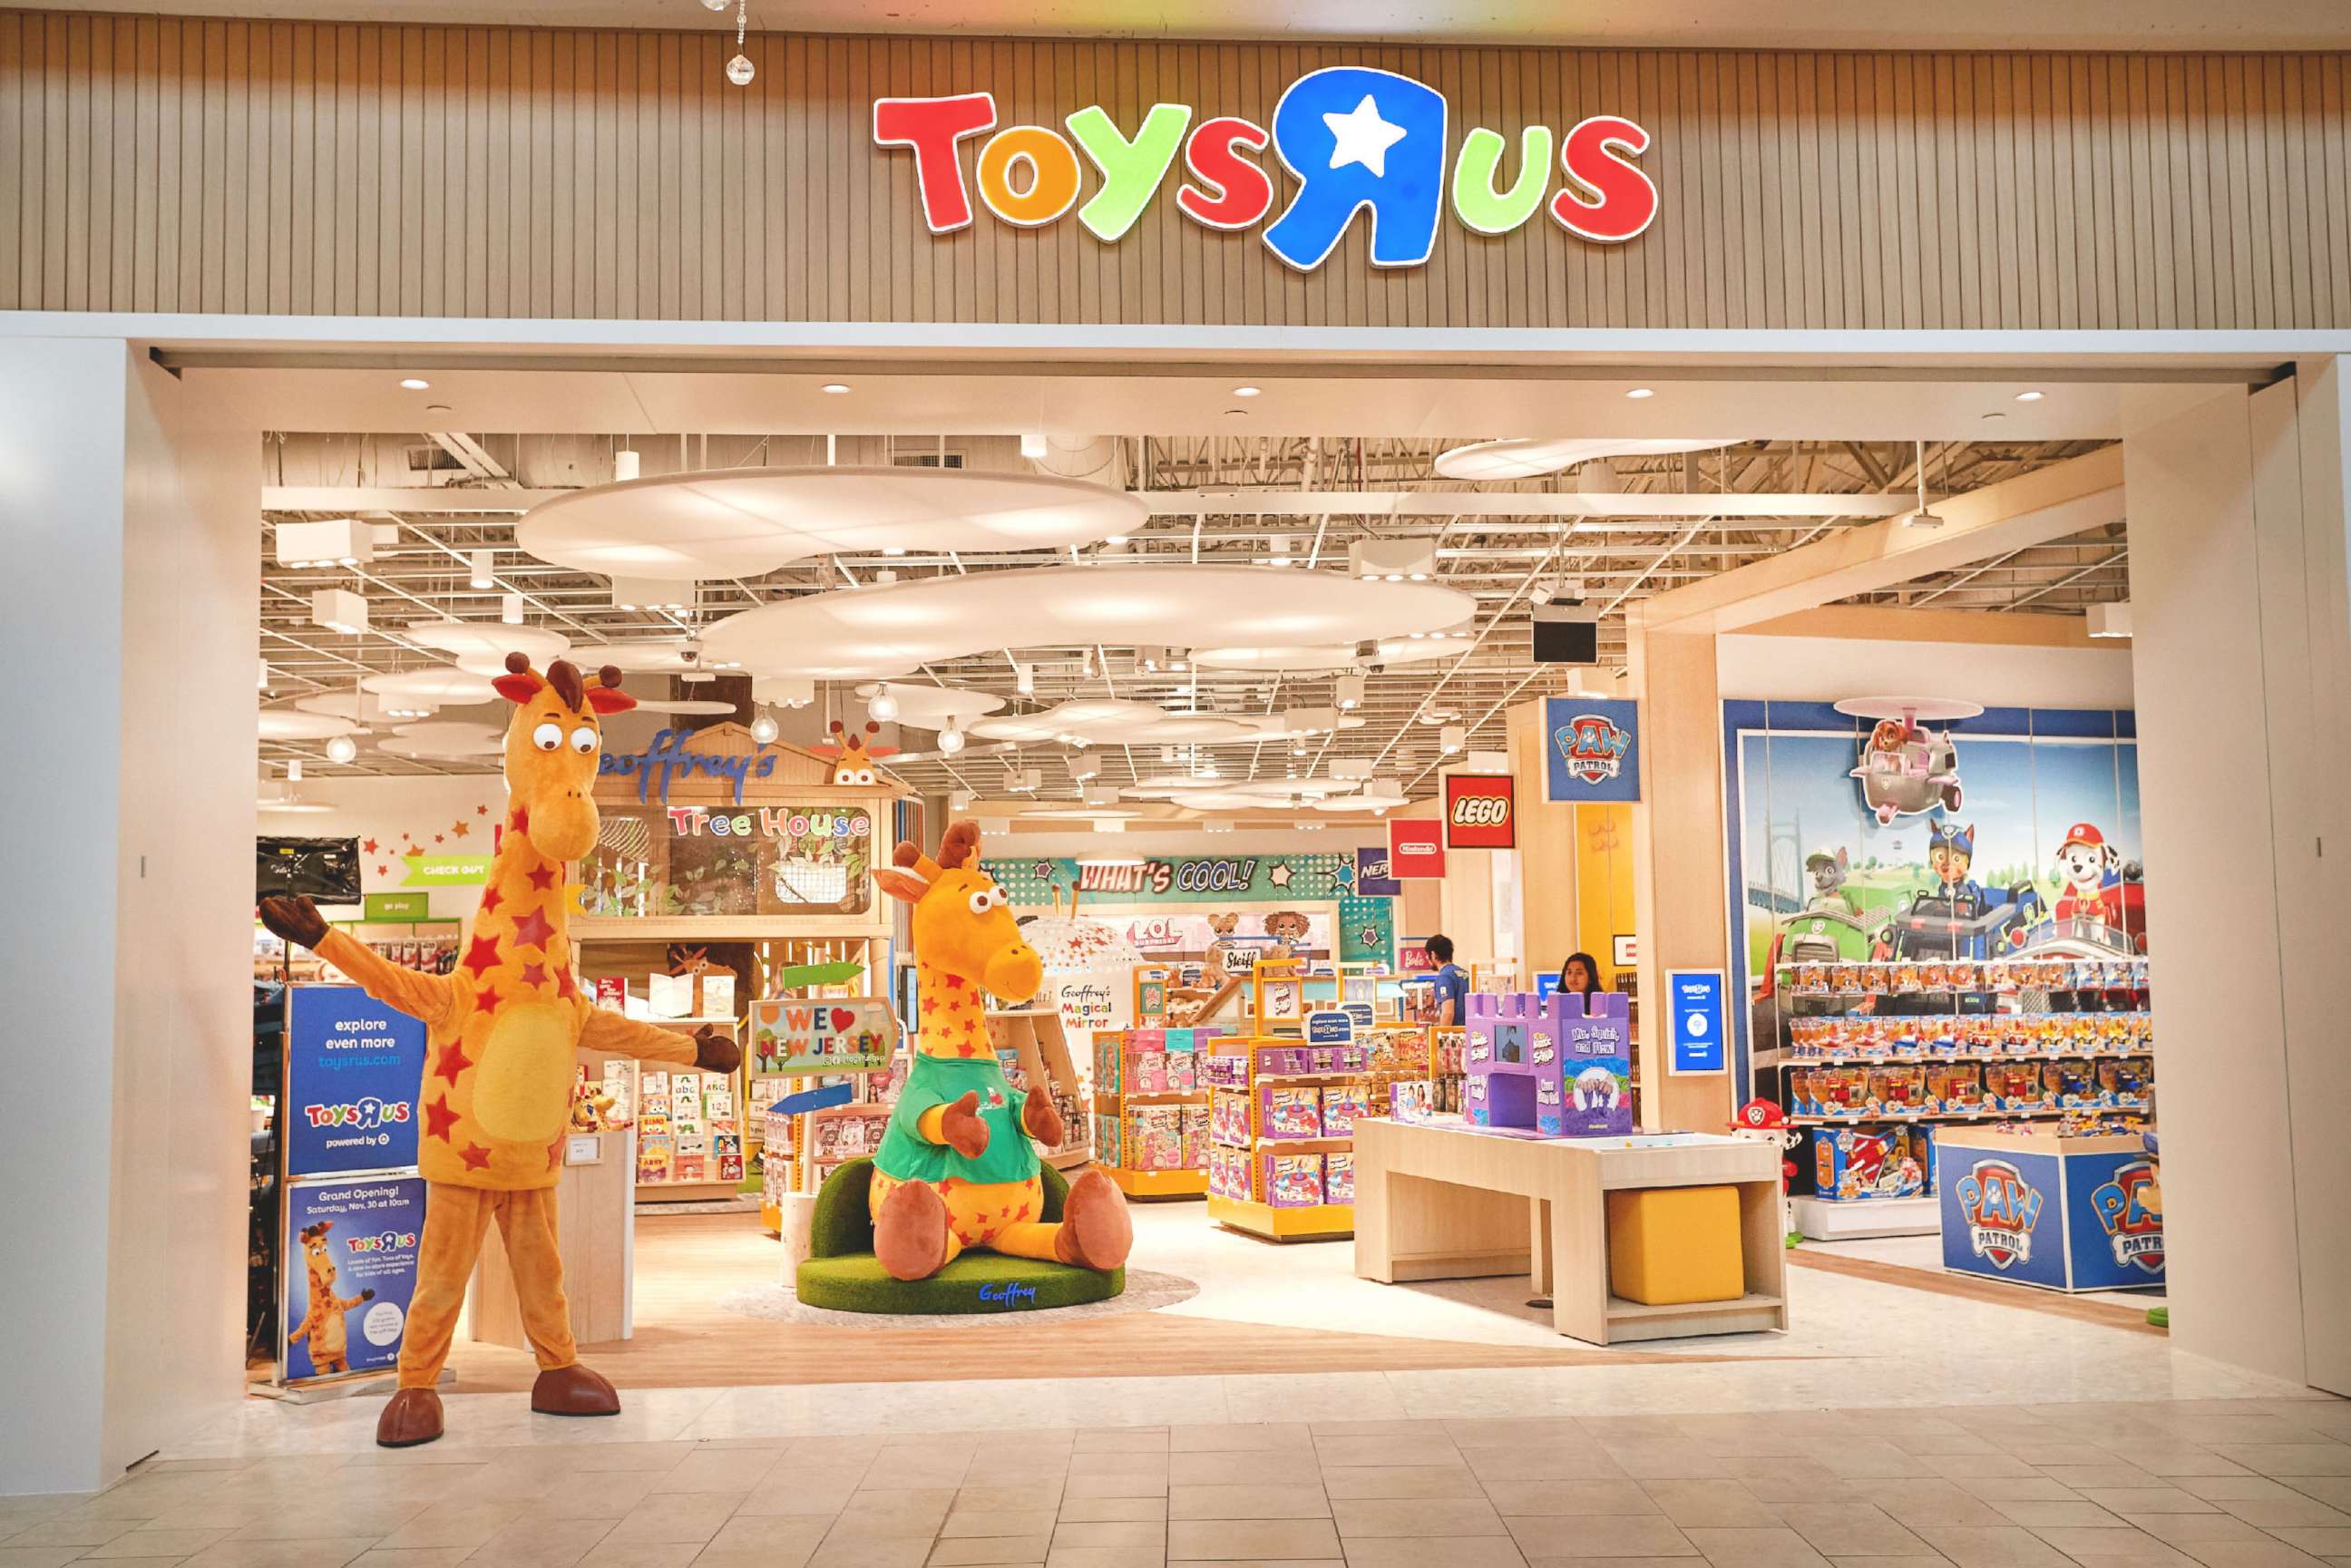 PHOTO: A Toys "R" Us store stands in Westfield Garden State Plaza in Paramus, N.J. The toy store is scheduled to open on Nov. 27, 2019.